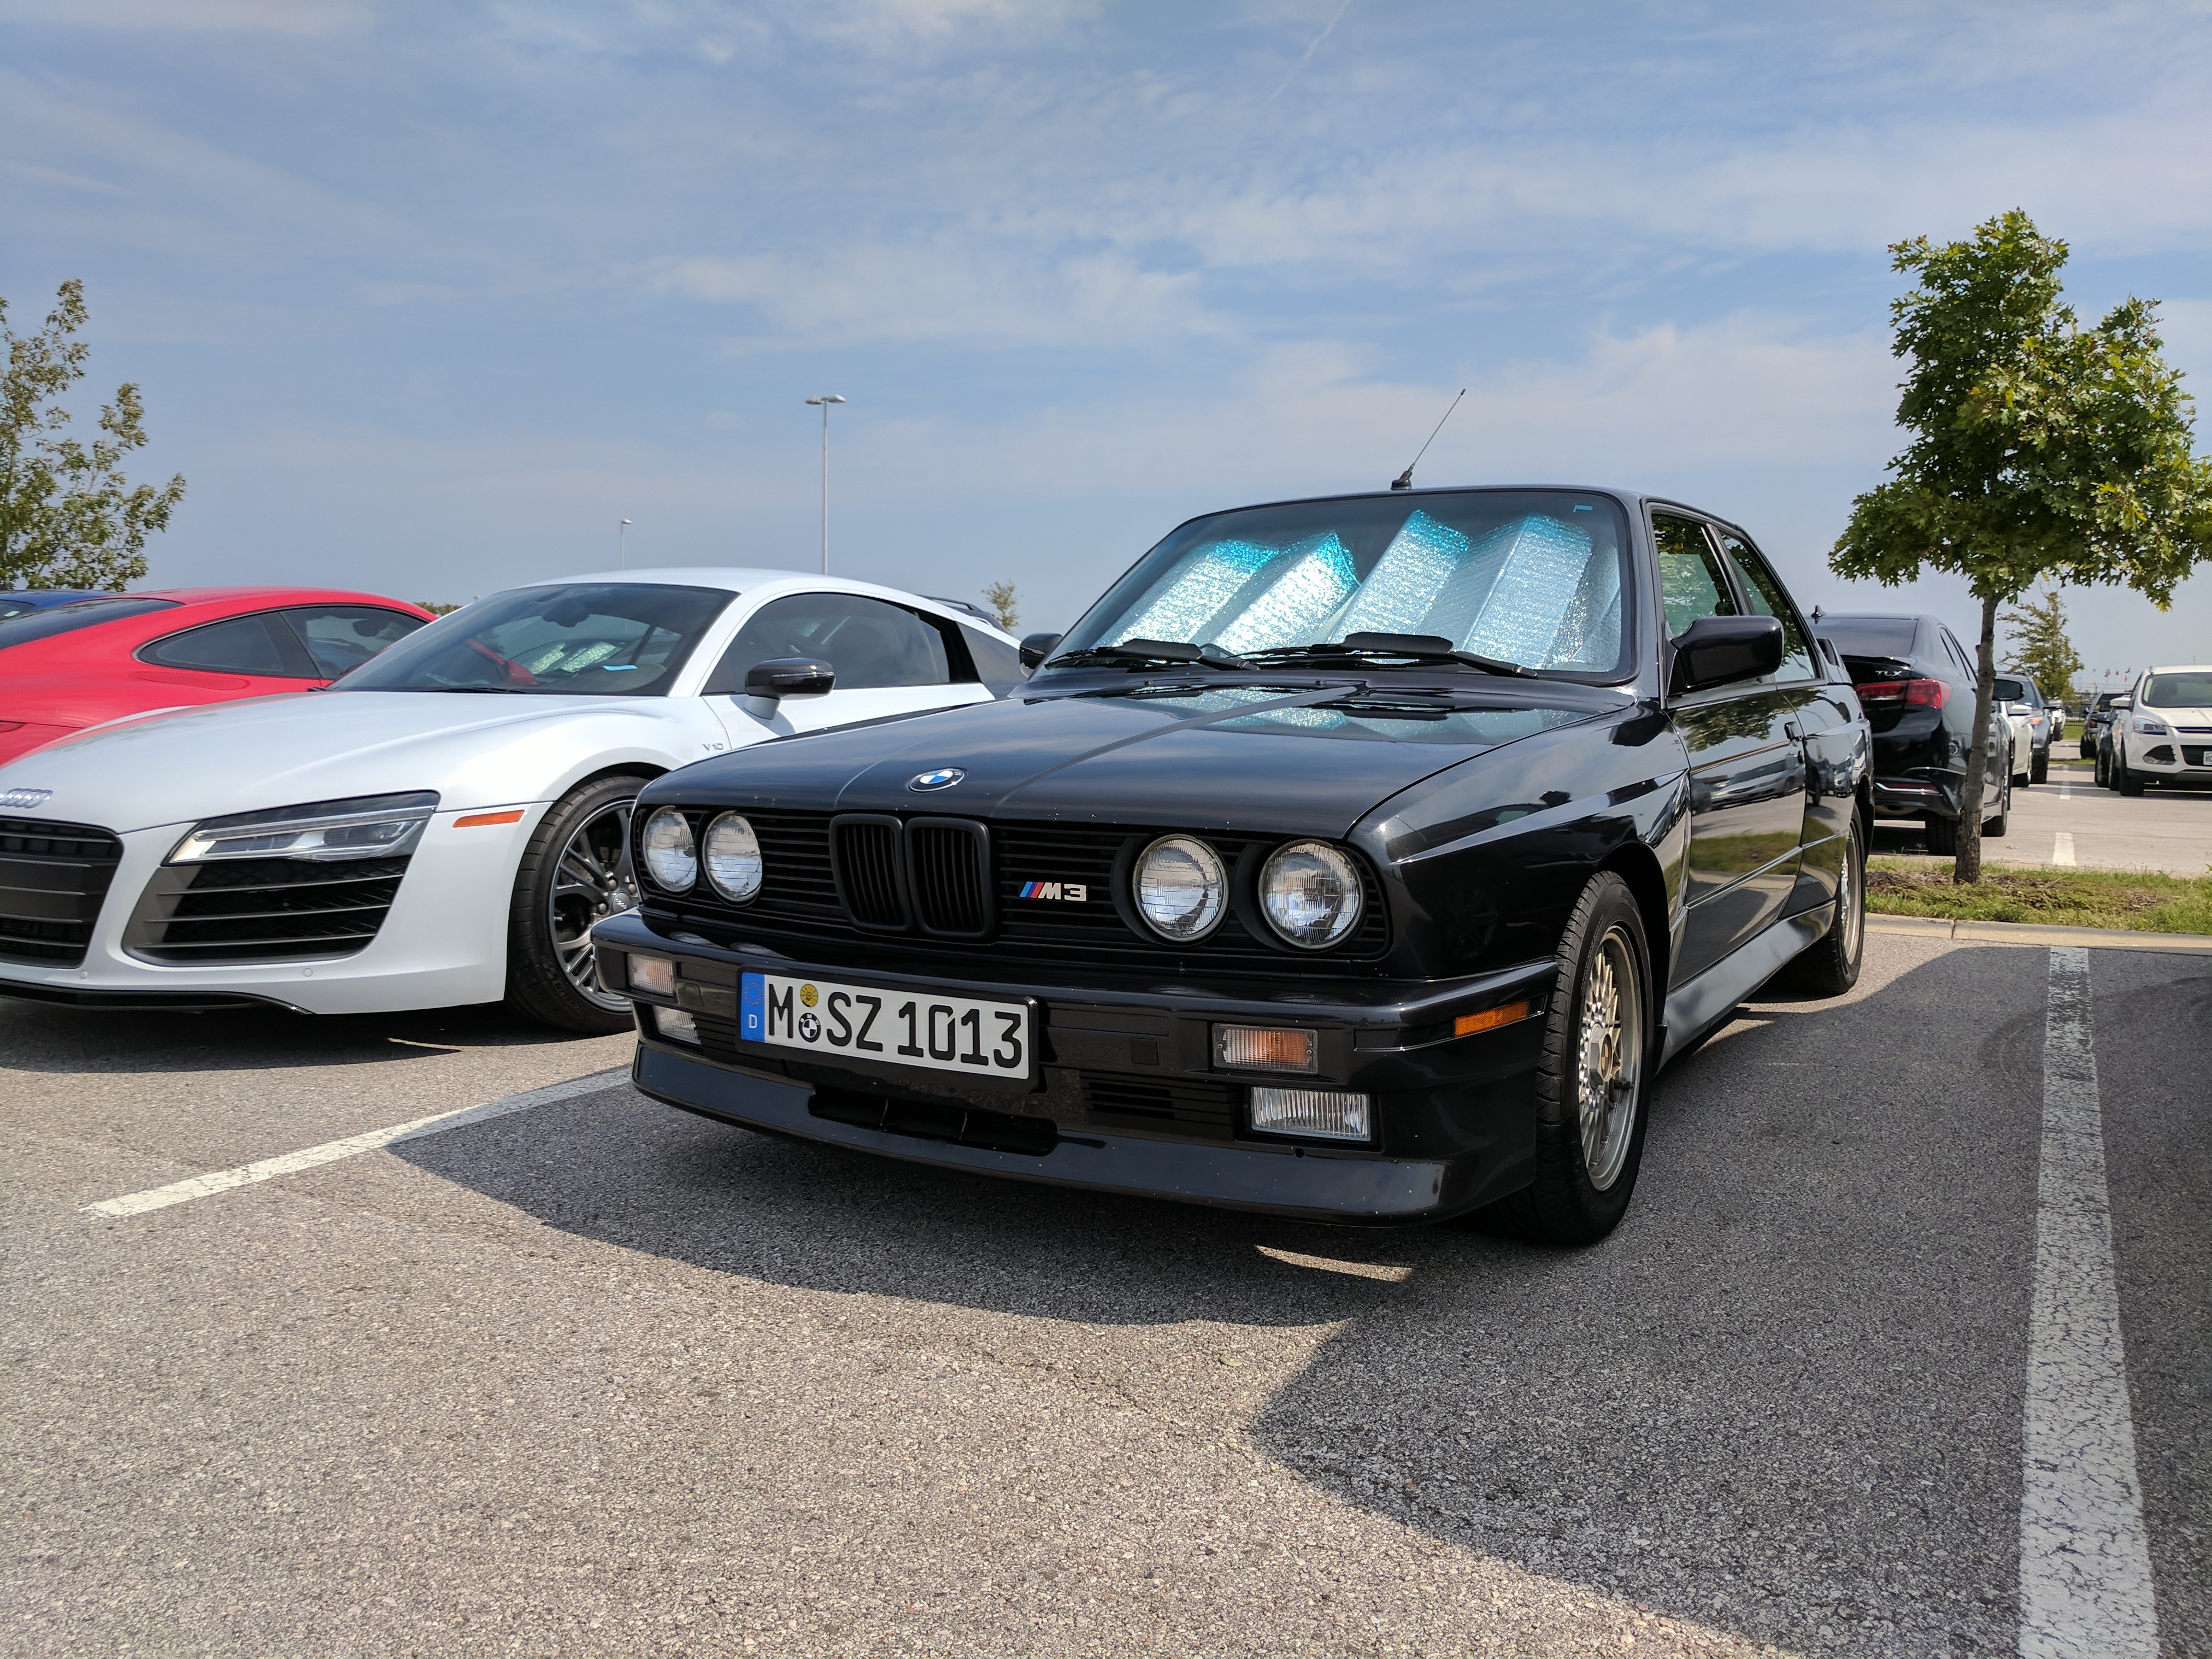 As often as I get to see sports cars from different eras, the E30 M3 seems to be rarer that one would expect.  I hardly ever see them.